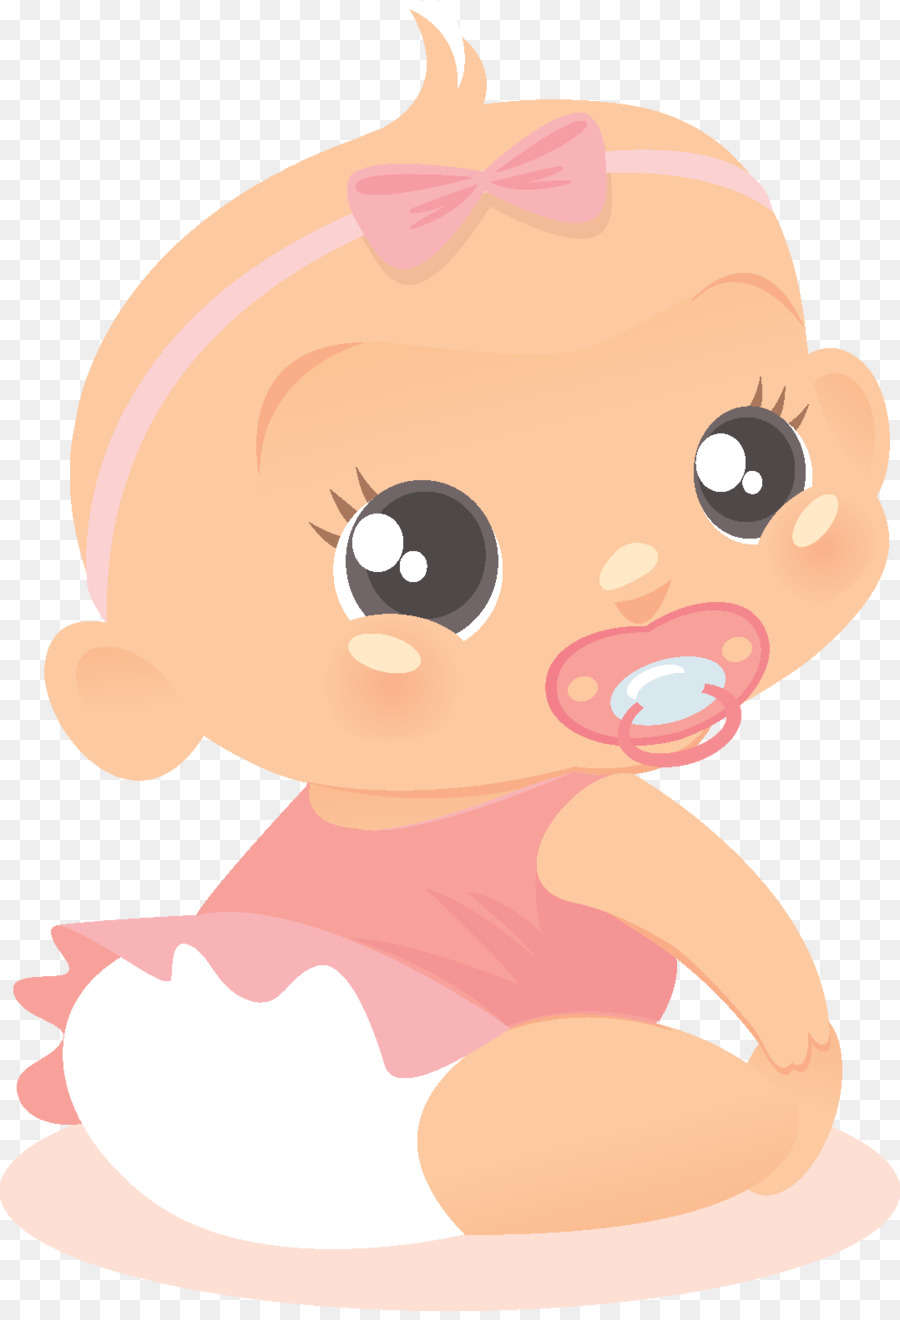 Download Diaper Vector at Vectorified.com | Collection of Diaper ...